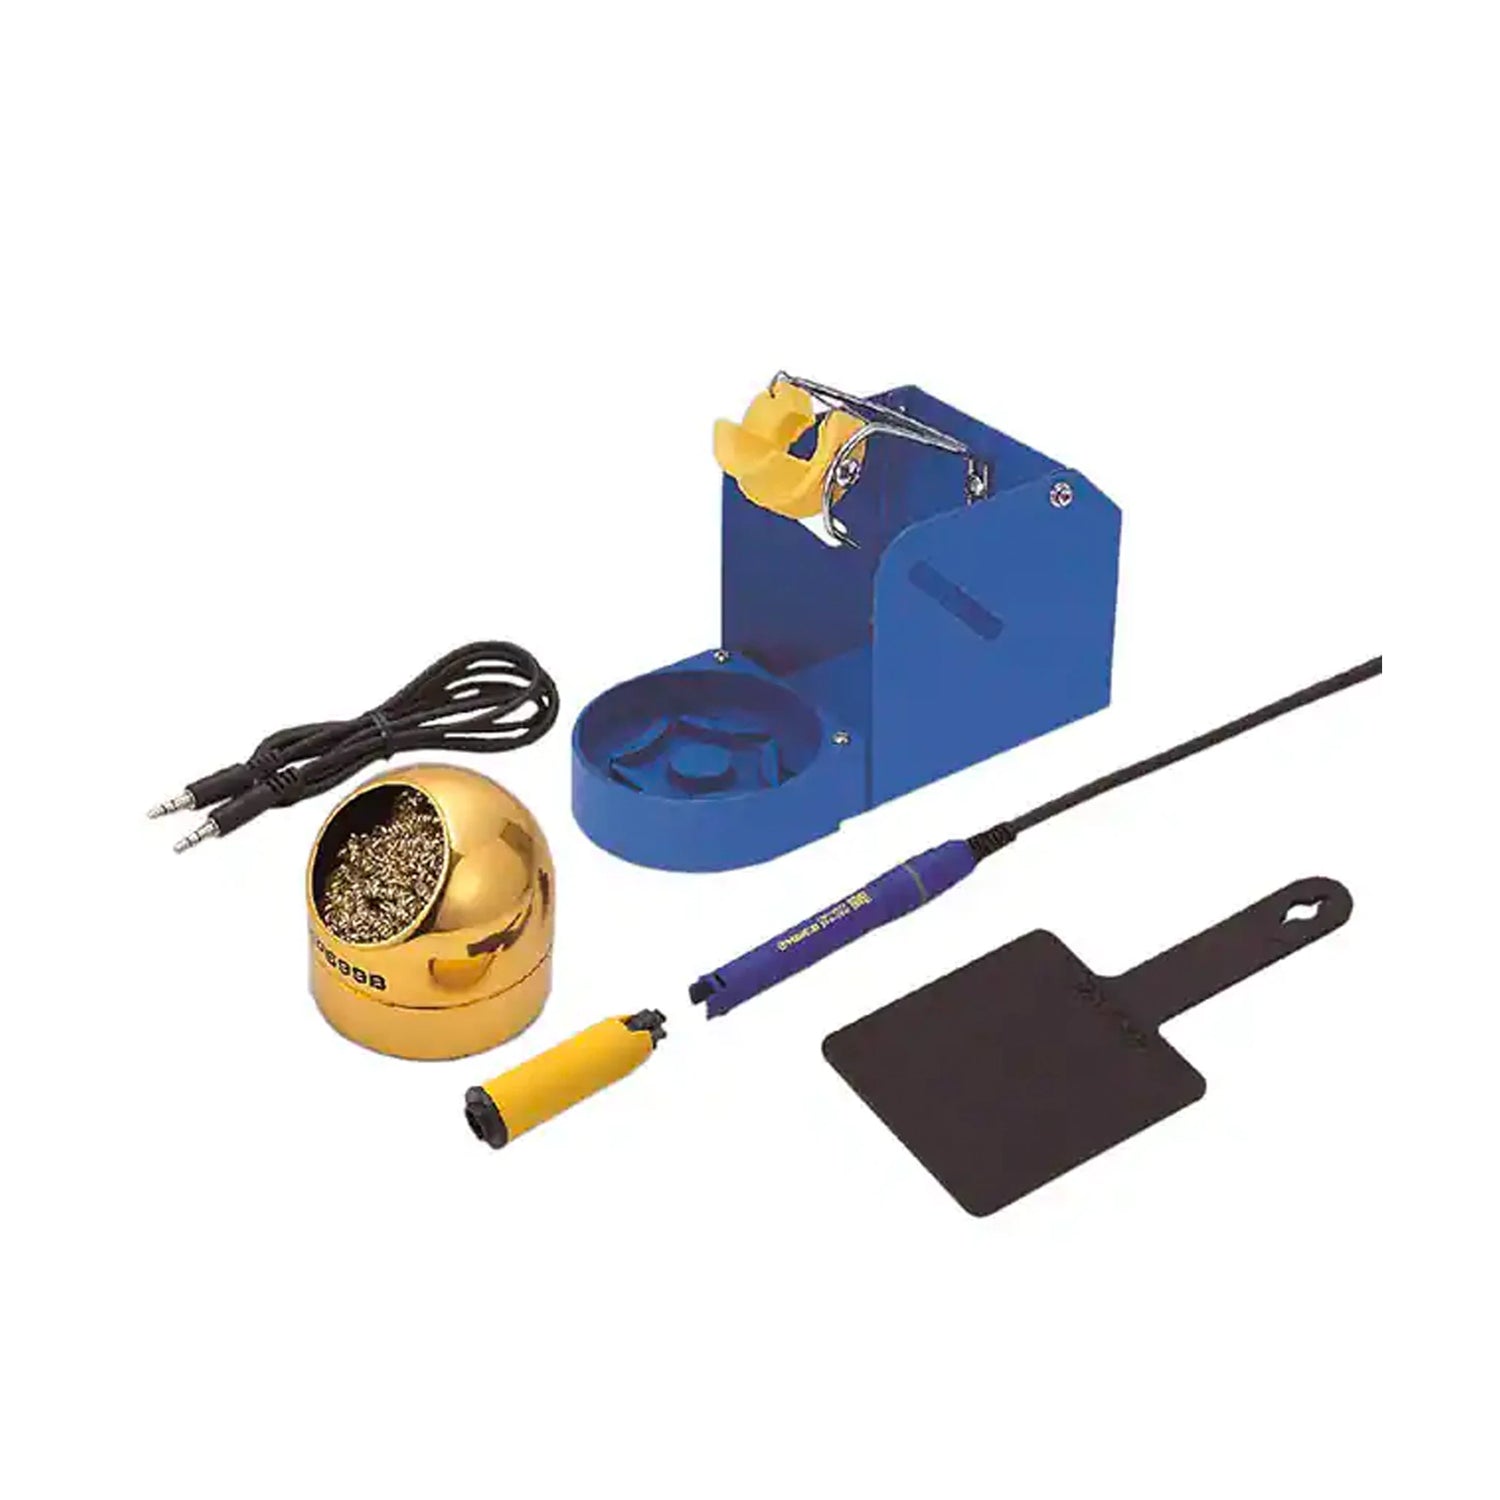 Hakko soldering iron FM2027 soldering iron conversion kit with brass wire tip cleaner and soldering iron holder, heat resistance pad, cable